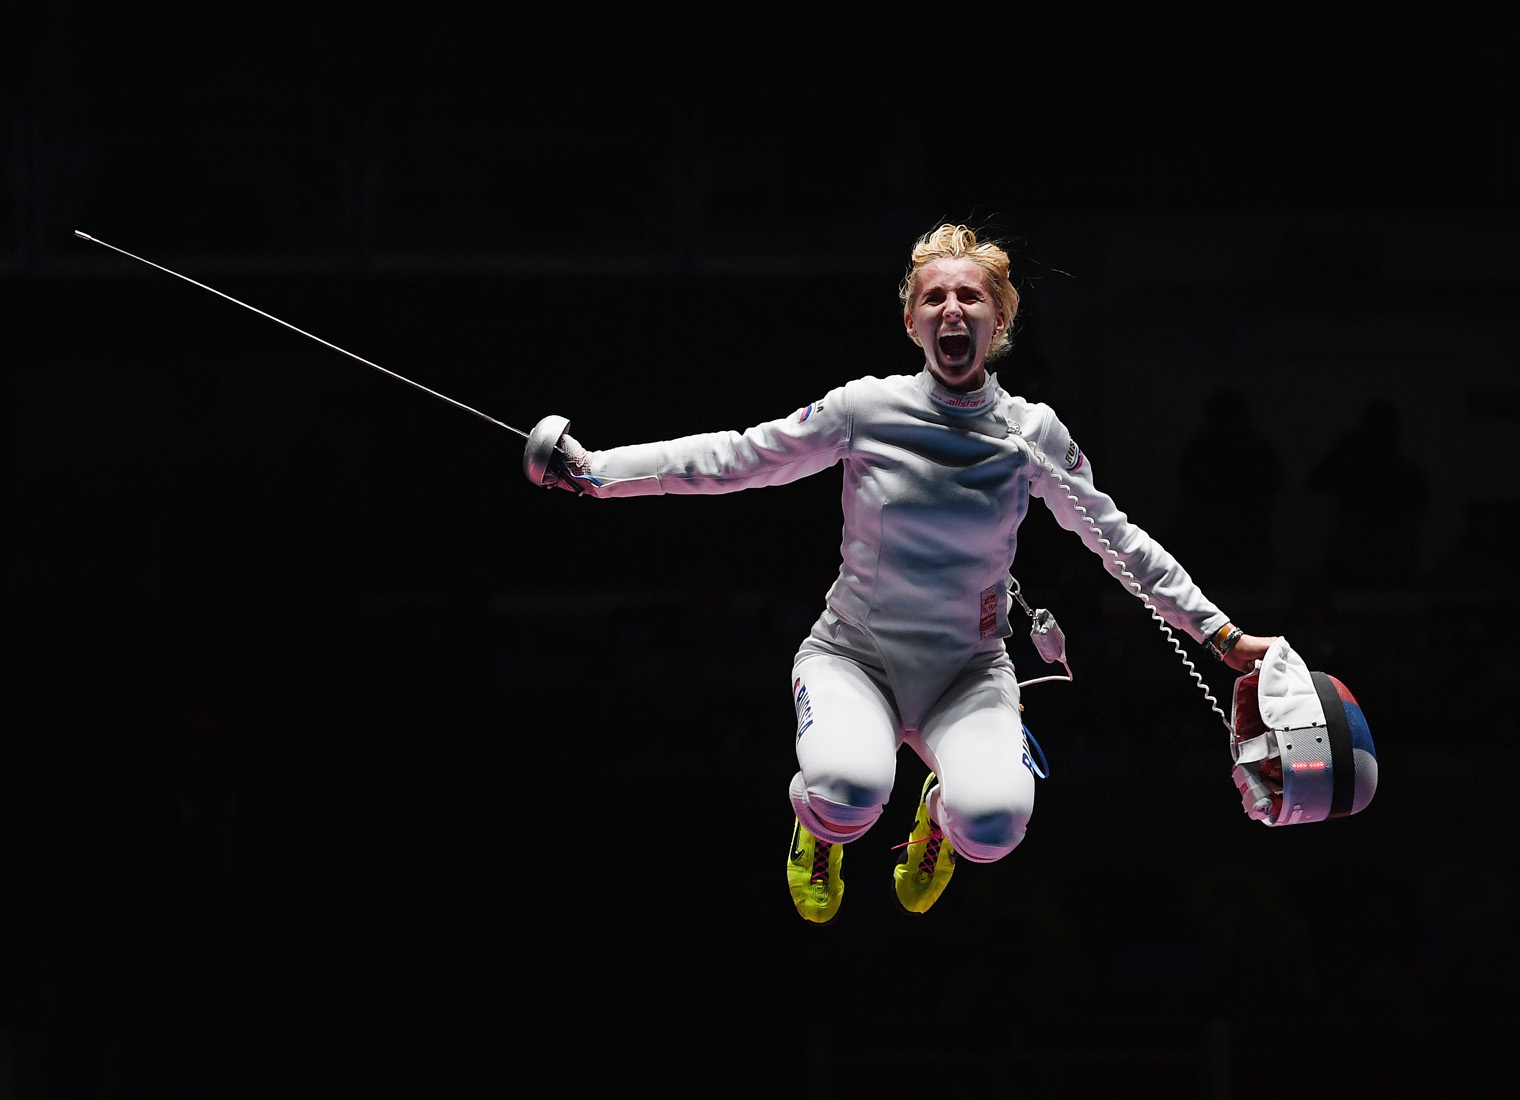 RIO DE JANEIRO, BRAZIL - AUGUST 11: Violetta Kolobova of Russia celebrates after defeating Irina Embrich of Estonia to help Russia win the Women's Epee Team Bronze Medal Match bout on Day 6 of the 2016 Rio Olympics at Carioca Arena 3 on August 11, 2016 in Rio de Janeiro, Brazil. (Photo by Laurence Griffiths/Getty Images)